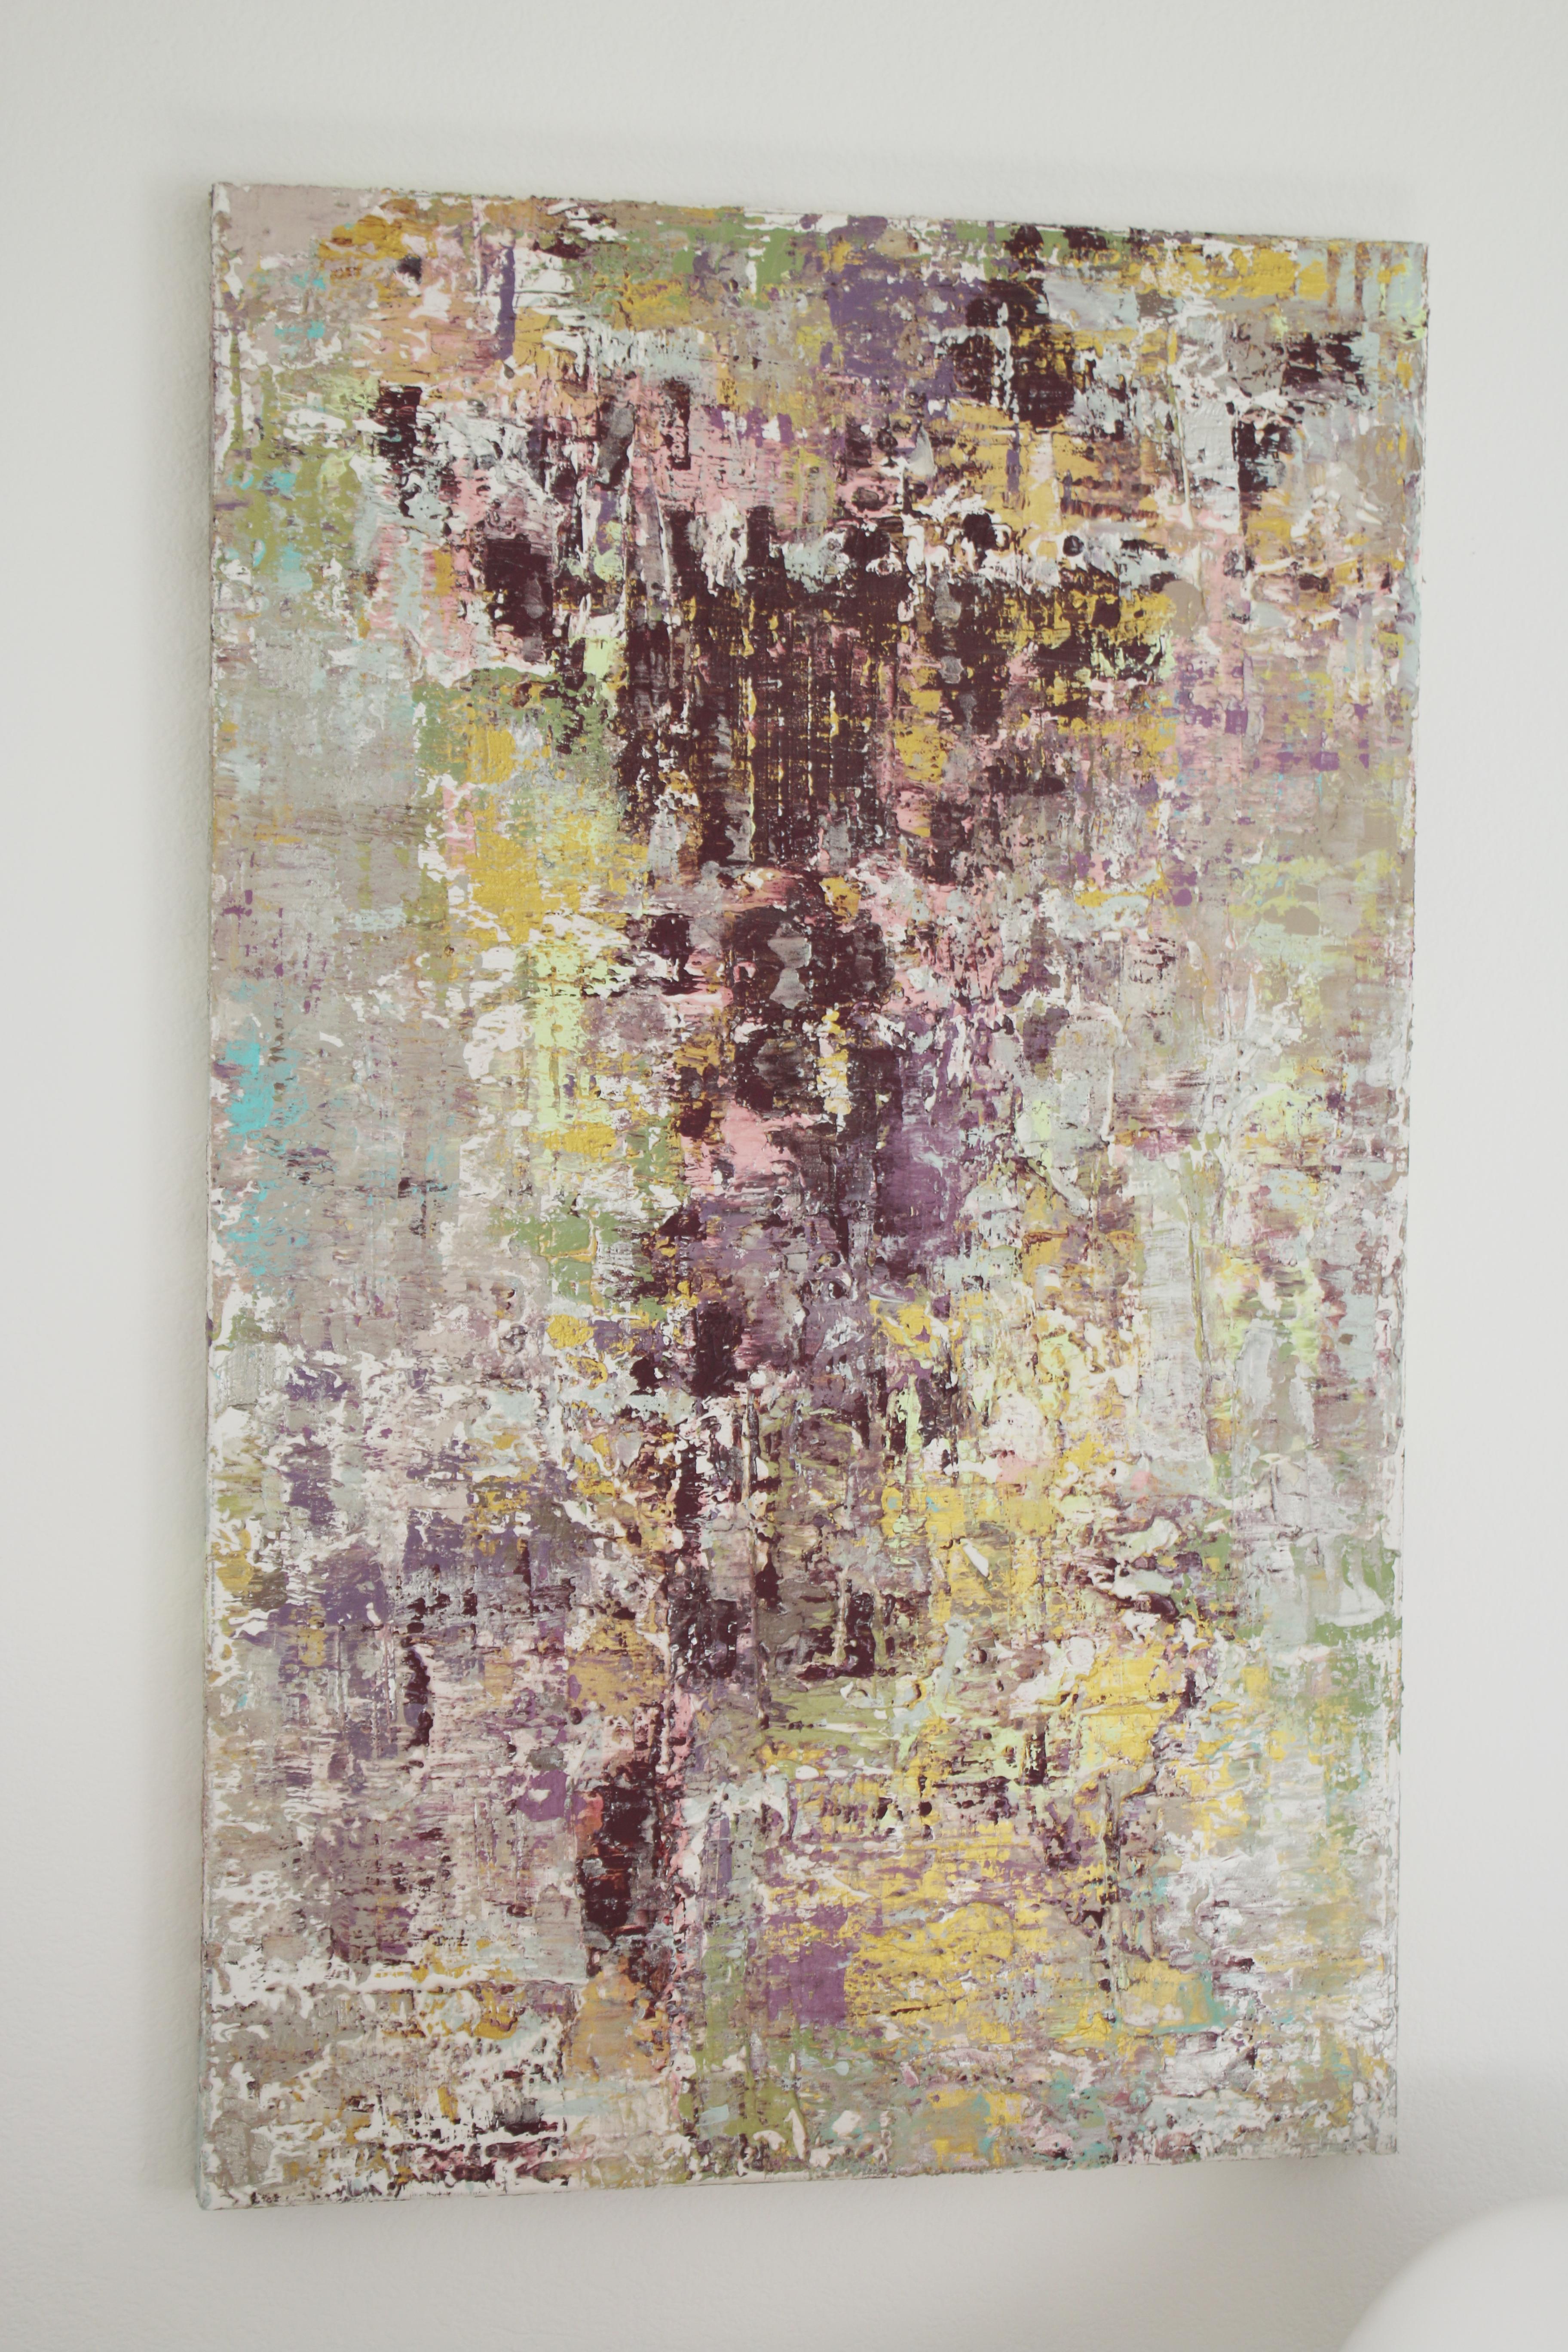 Purple Abstract Mixed Medium on Canvas Heavy Textured, Calm Emotions 24x48